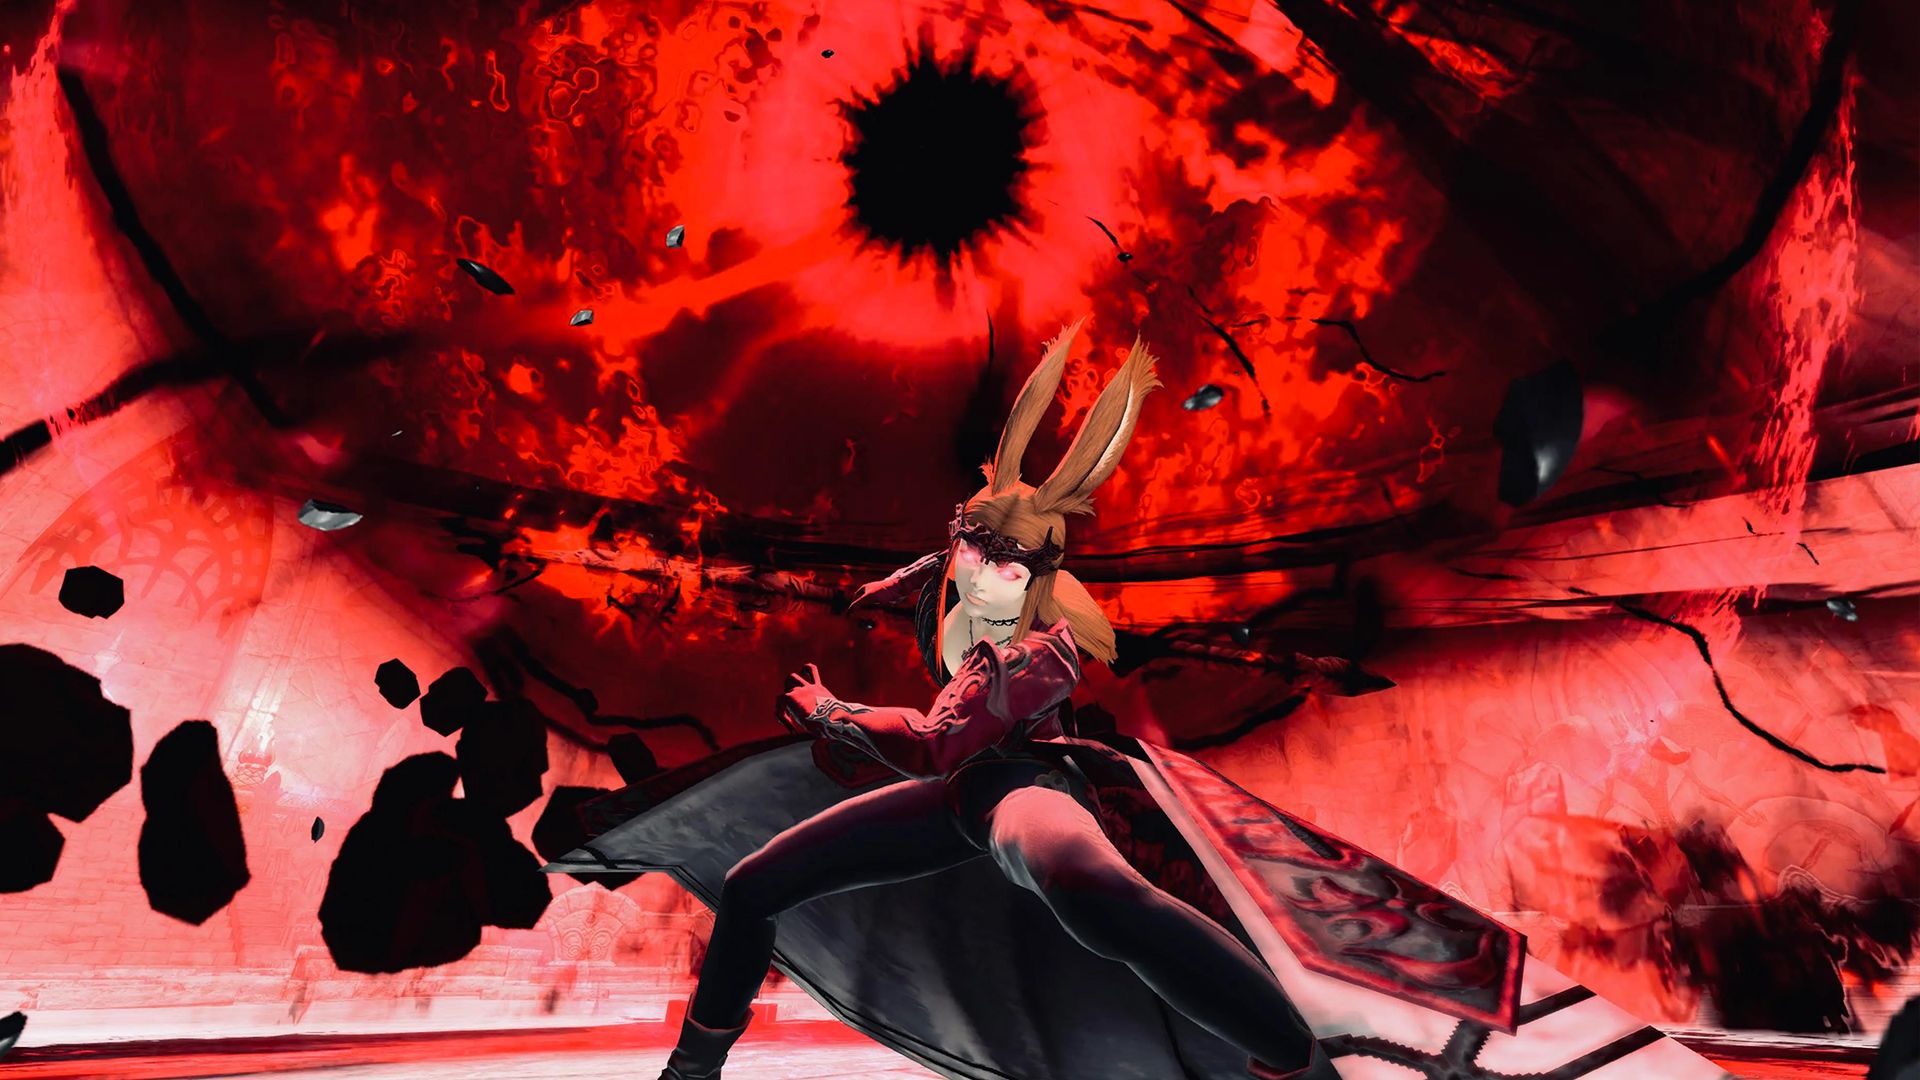 final fantasy 14 scarlet witch reaper viera glamour outfit